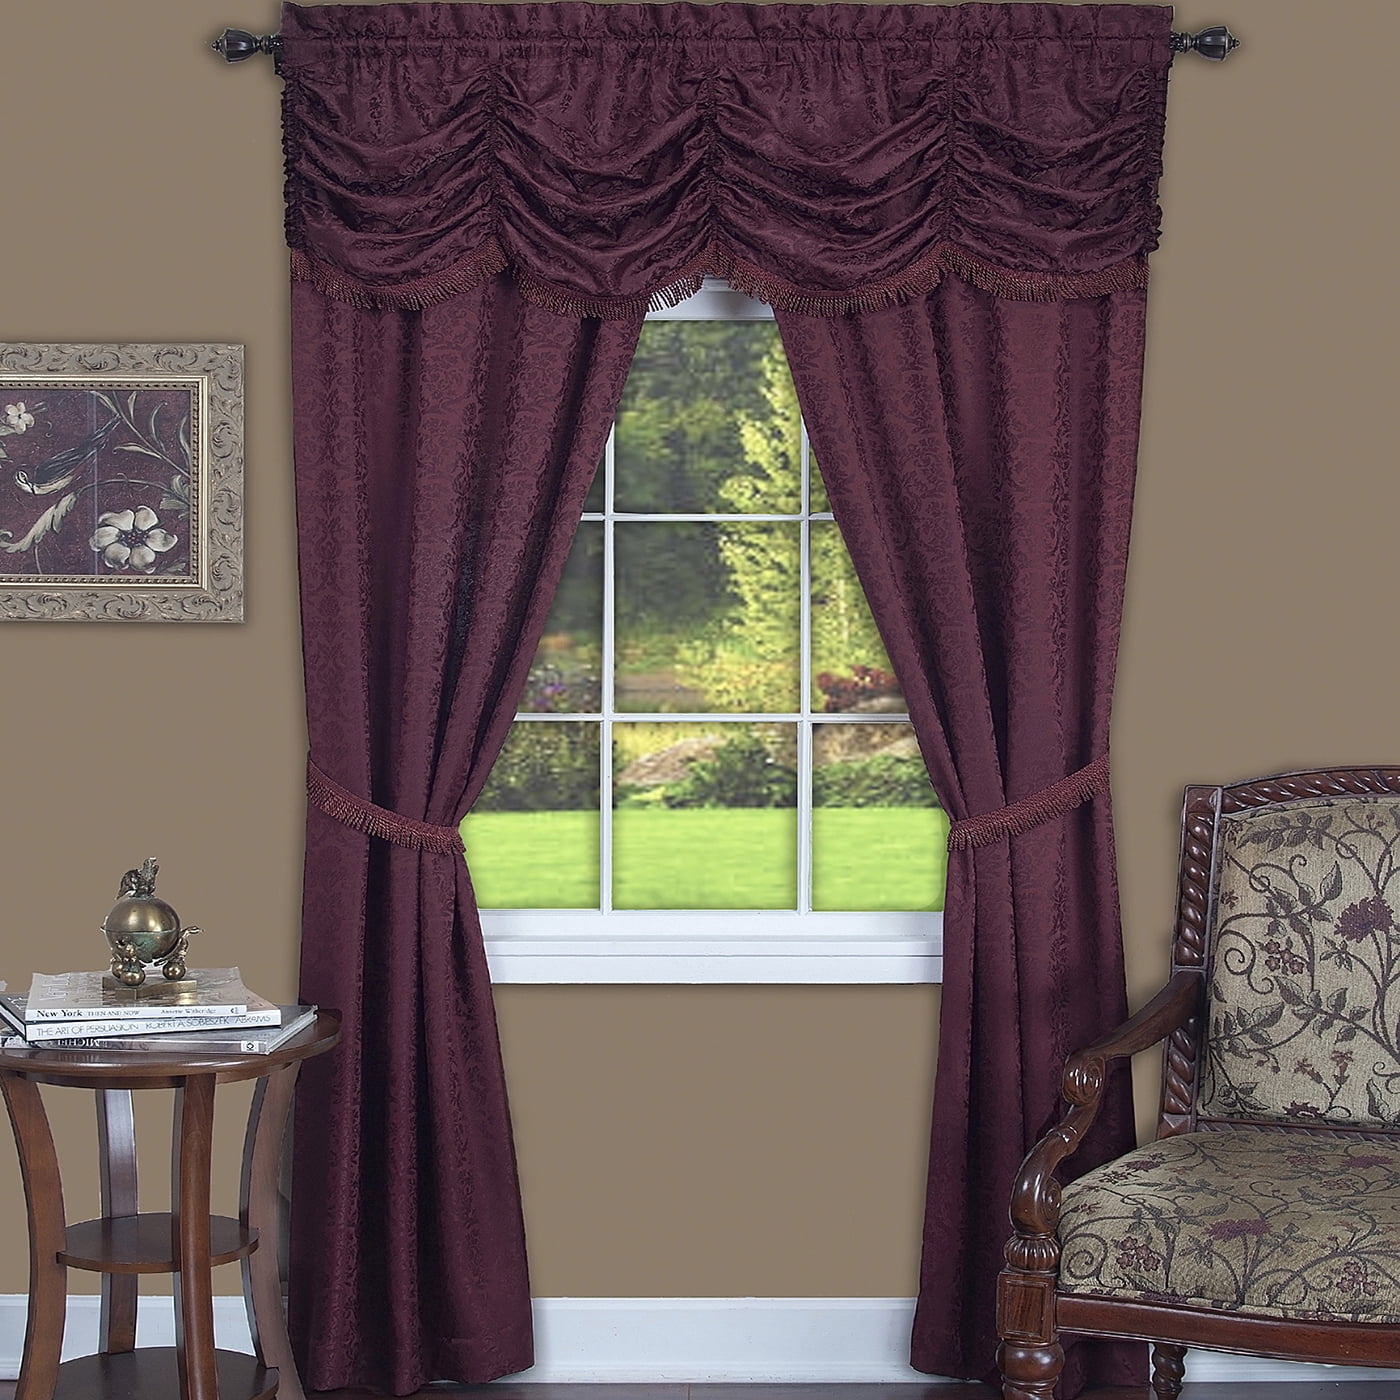 Complete 5 Pc Window in a Bag Floral Sheer Curtain Set Assorted Colors & Sizes 